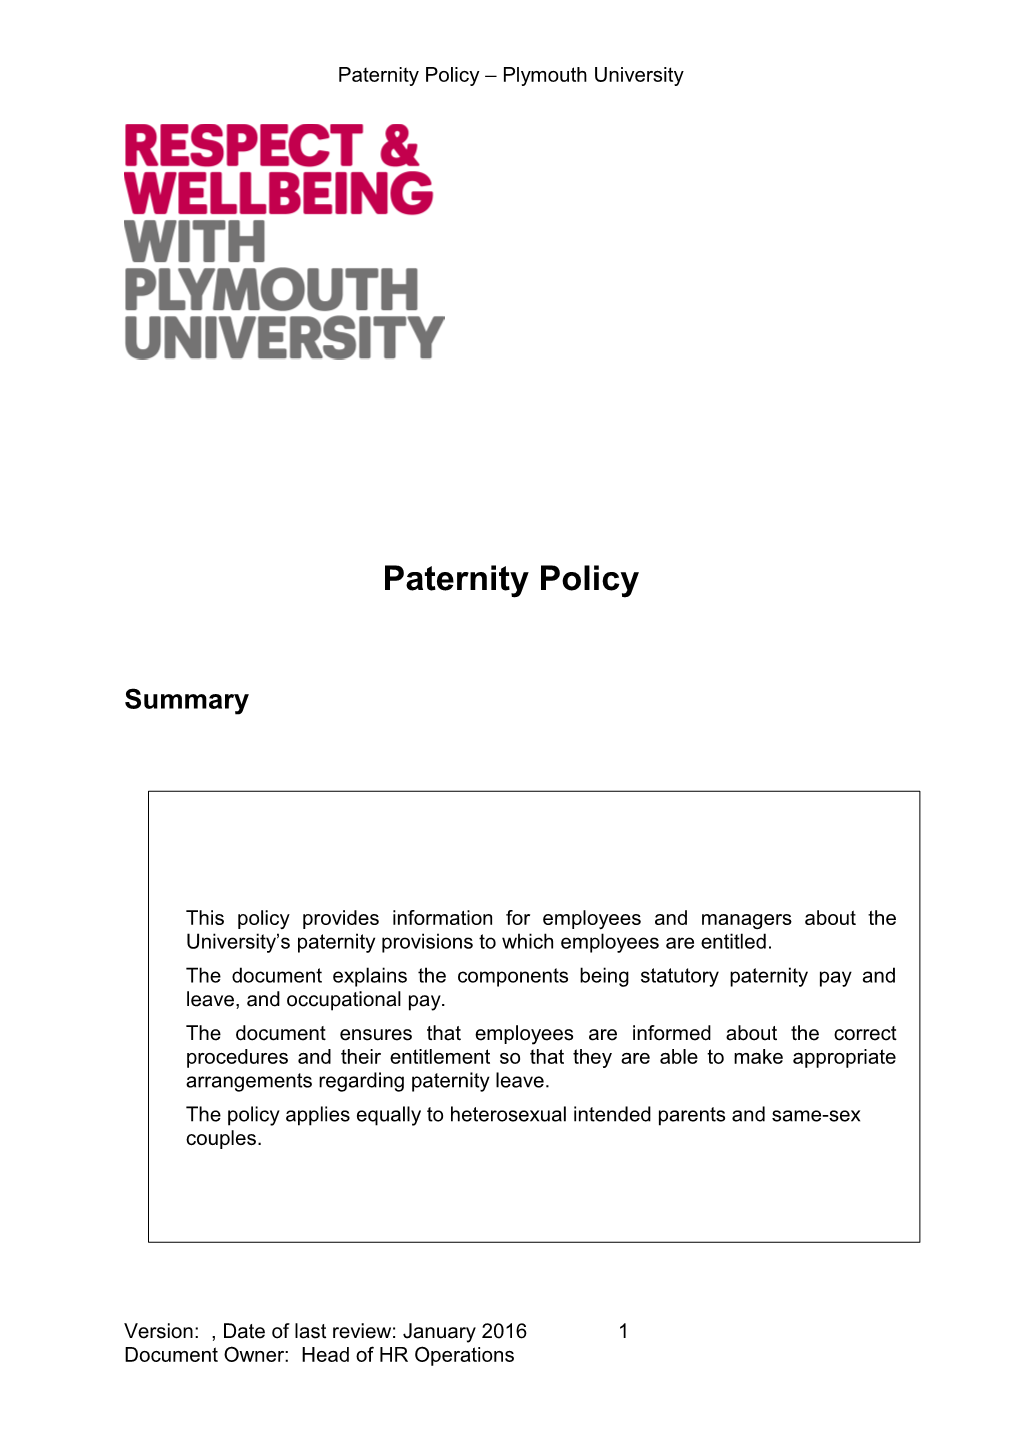 Policy - University of Plymouth